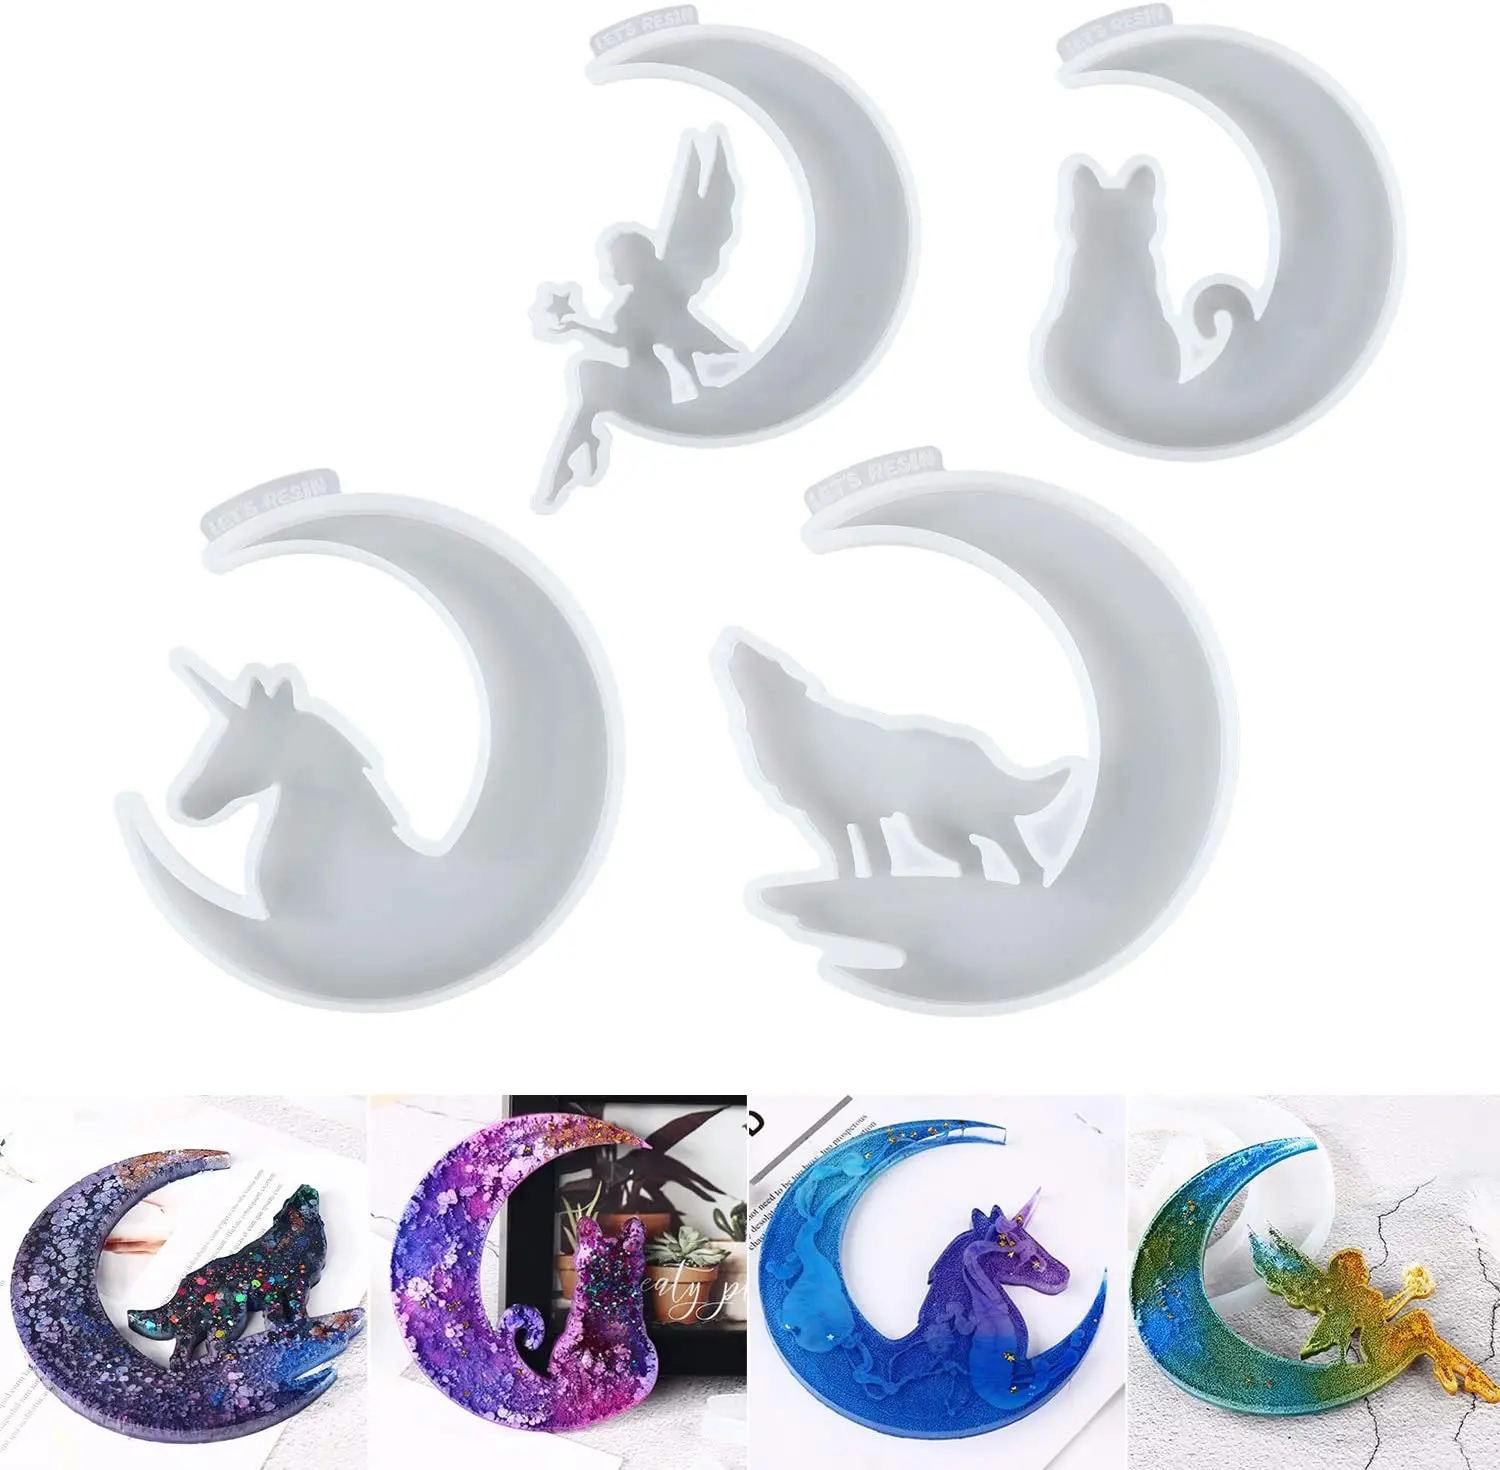 DIY Pendant Silicone Mold Moon Wolf Mermaid Princess Silicone Mold For Epoxy Resin Jewelry Accessories